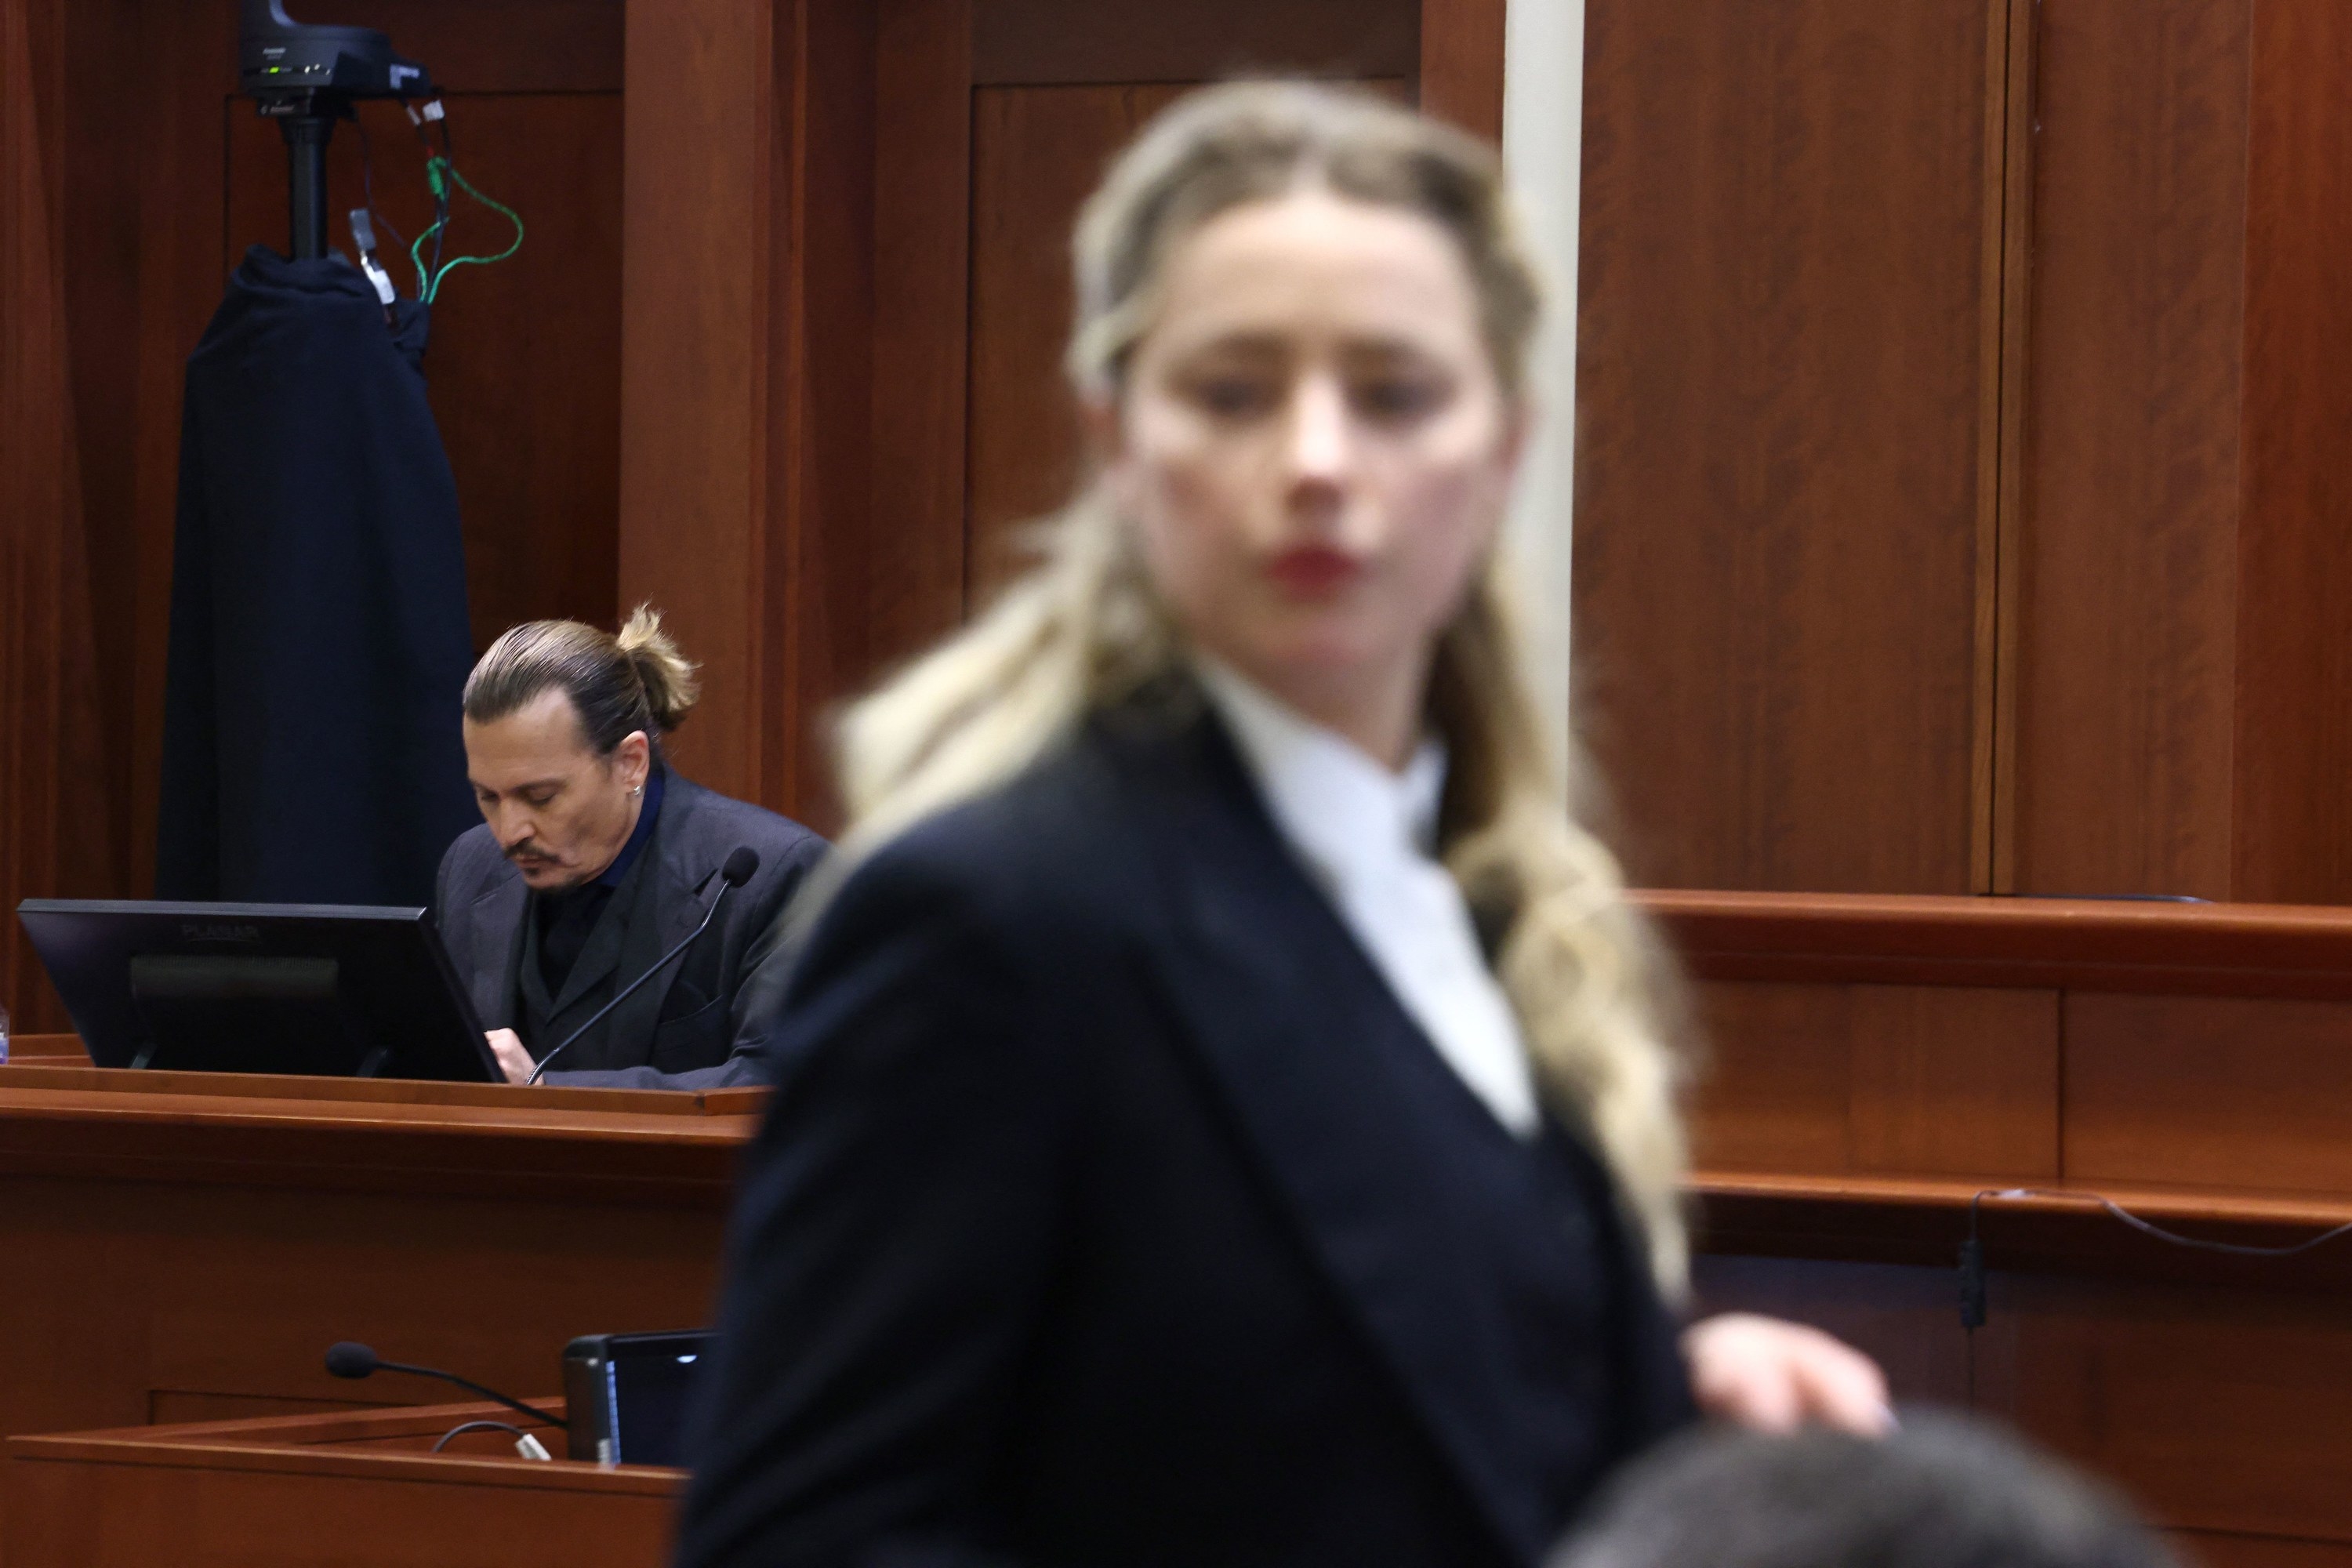 Amber Heard in the foreground, and Johnny Depp in the background, both in court